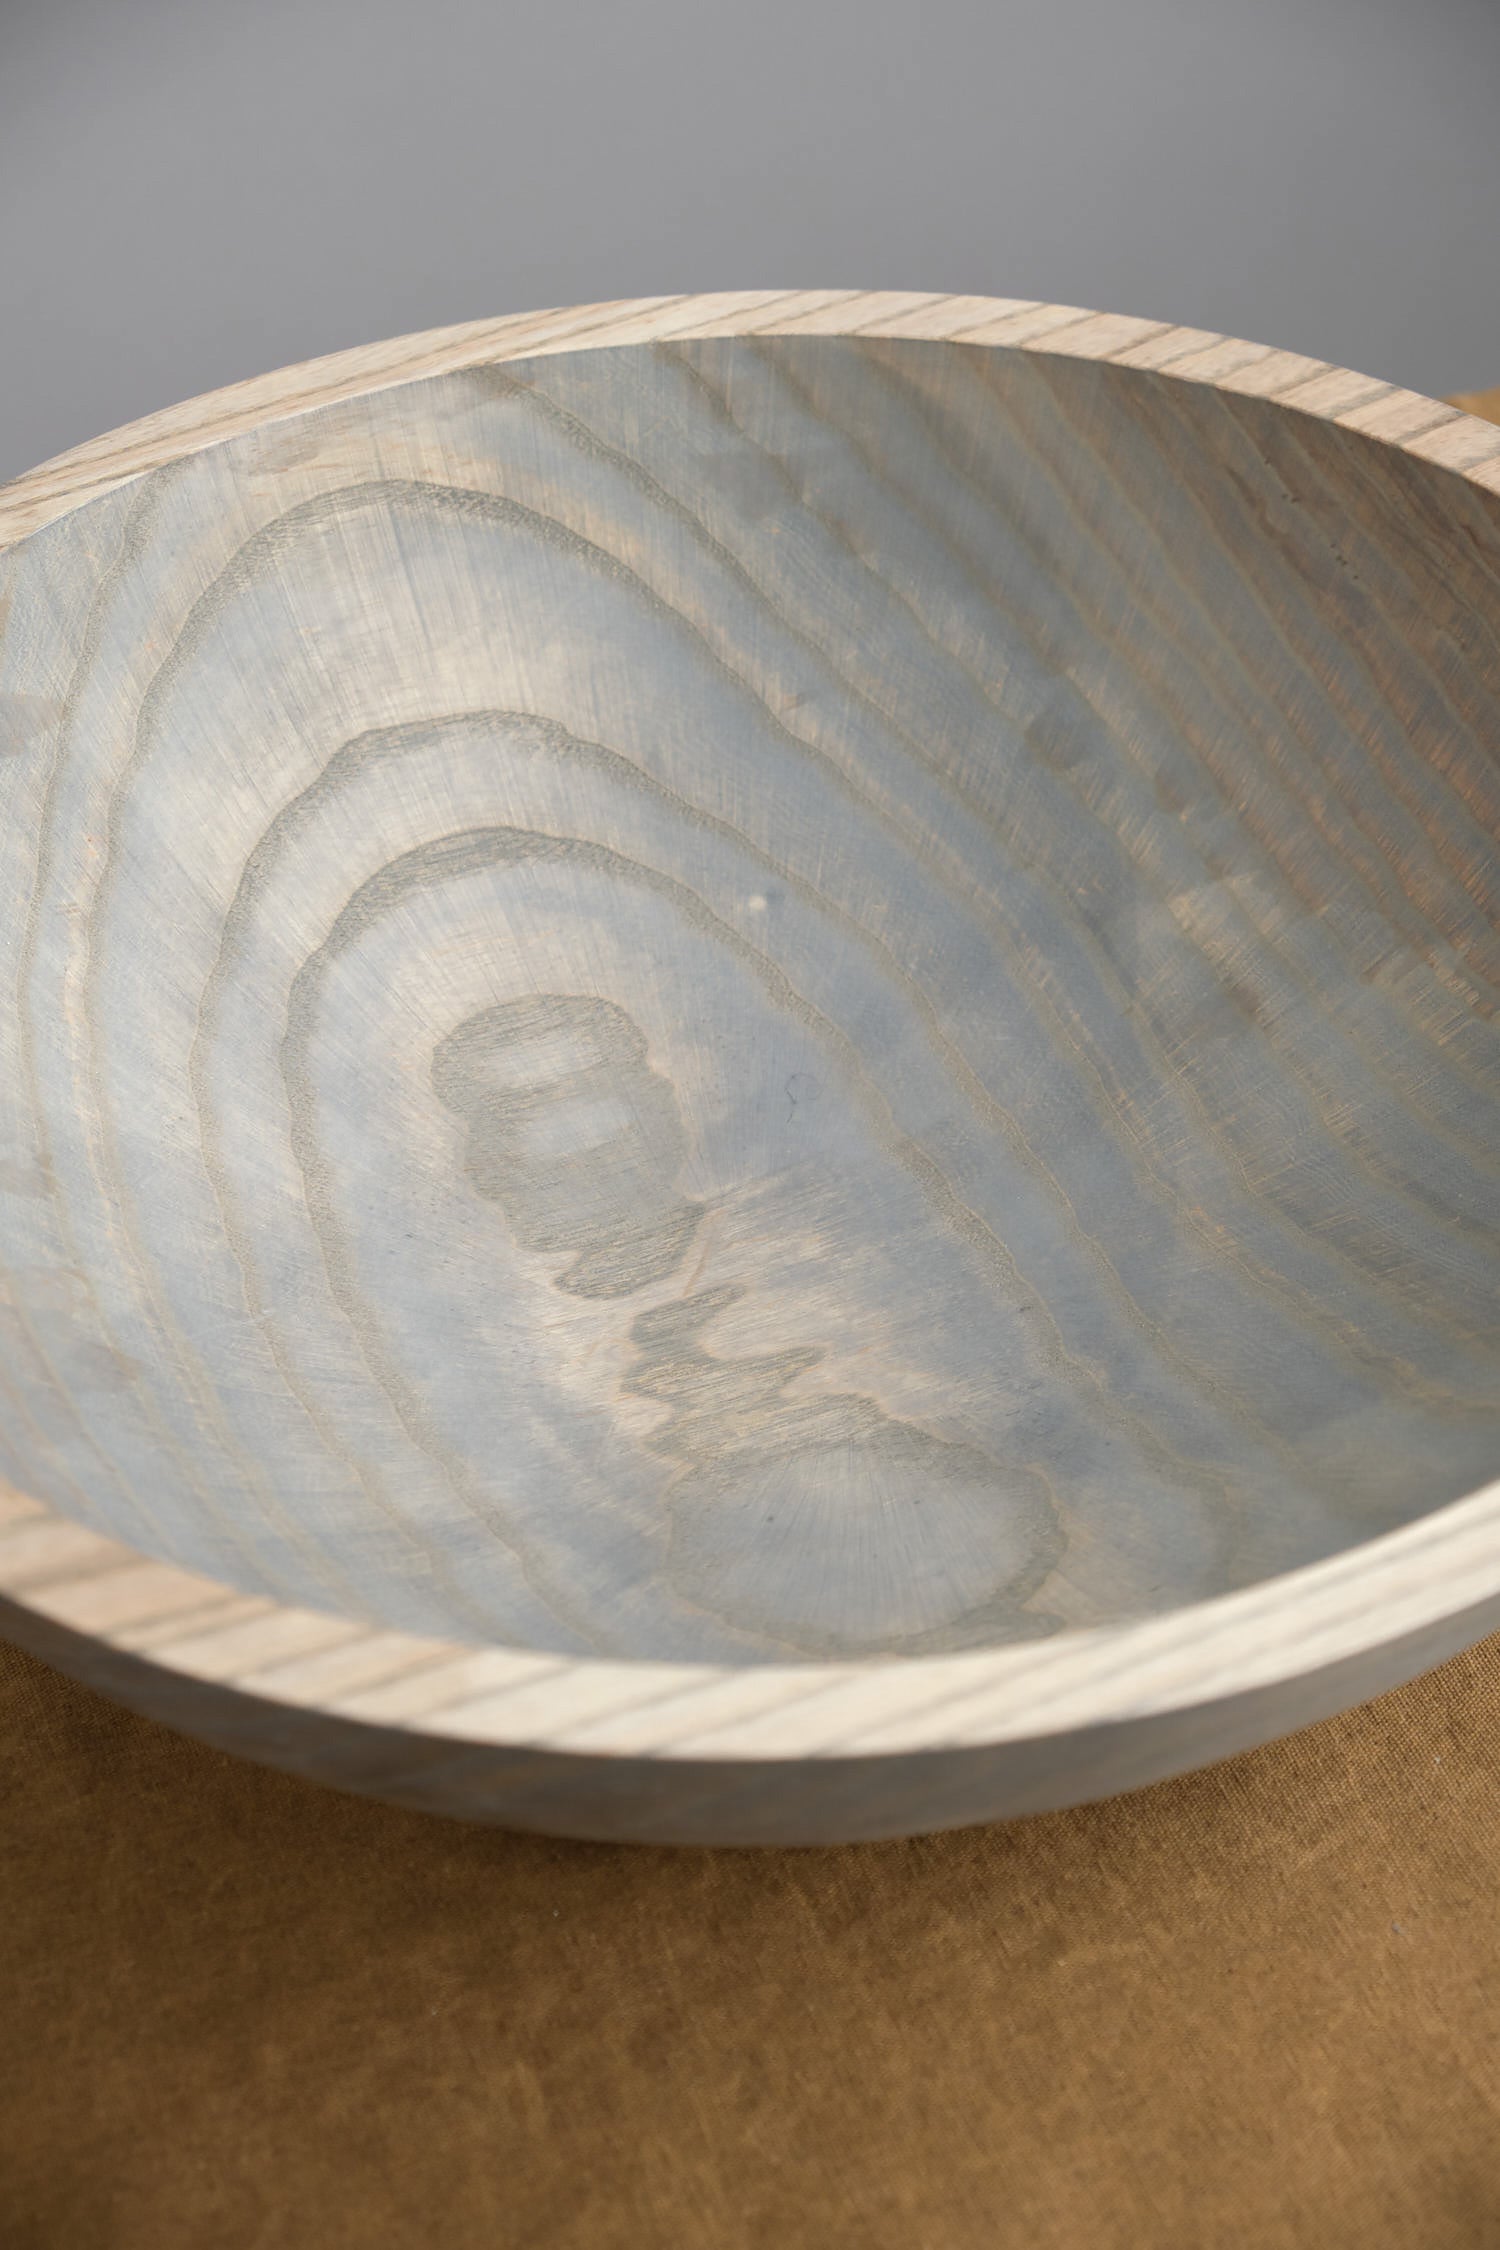 Inside of 15" Crafted Wooden Bowl in Grey